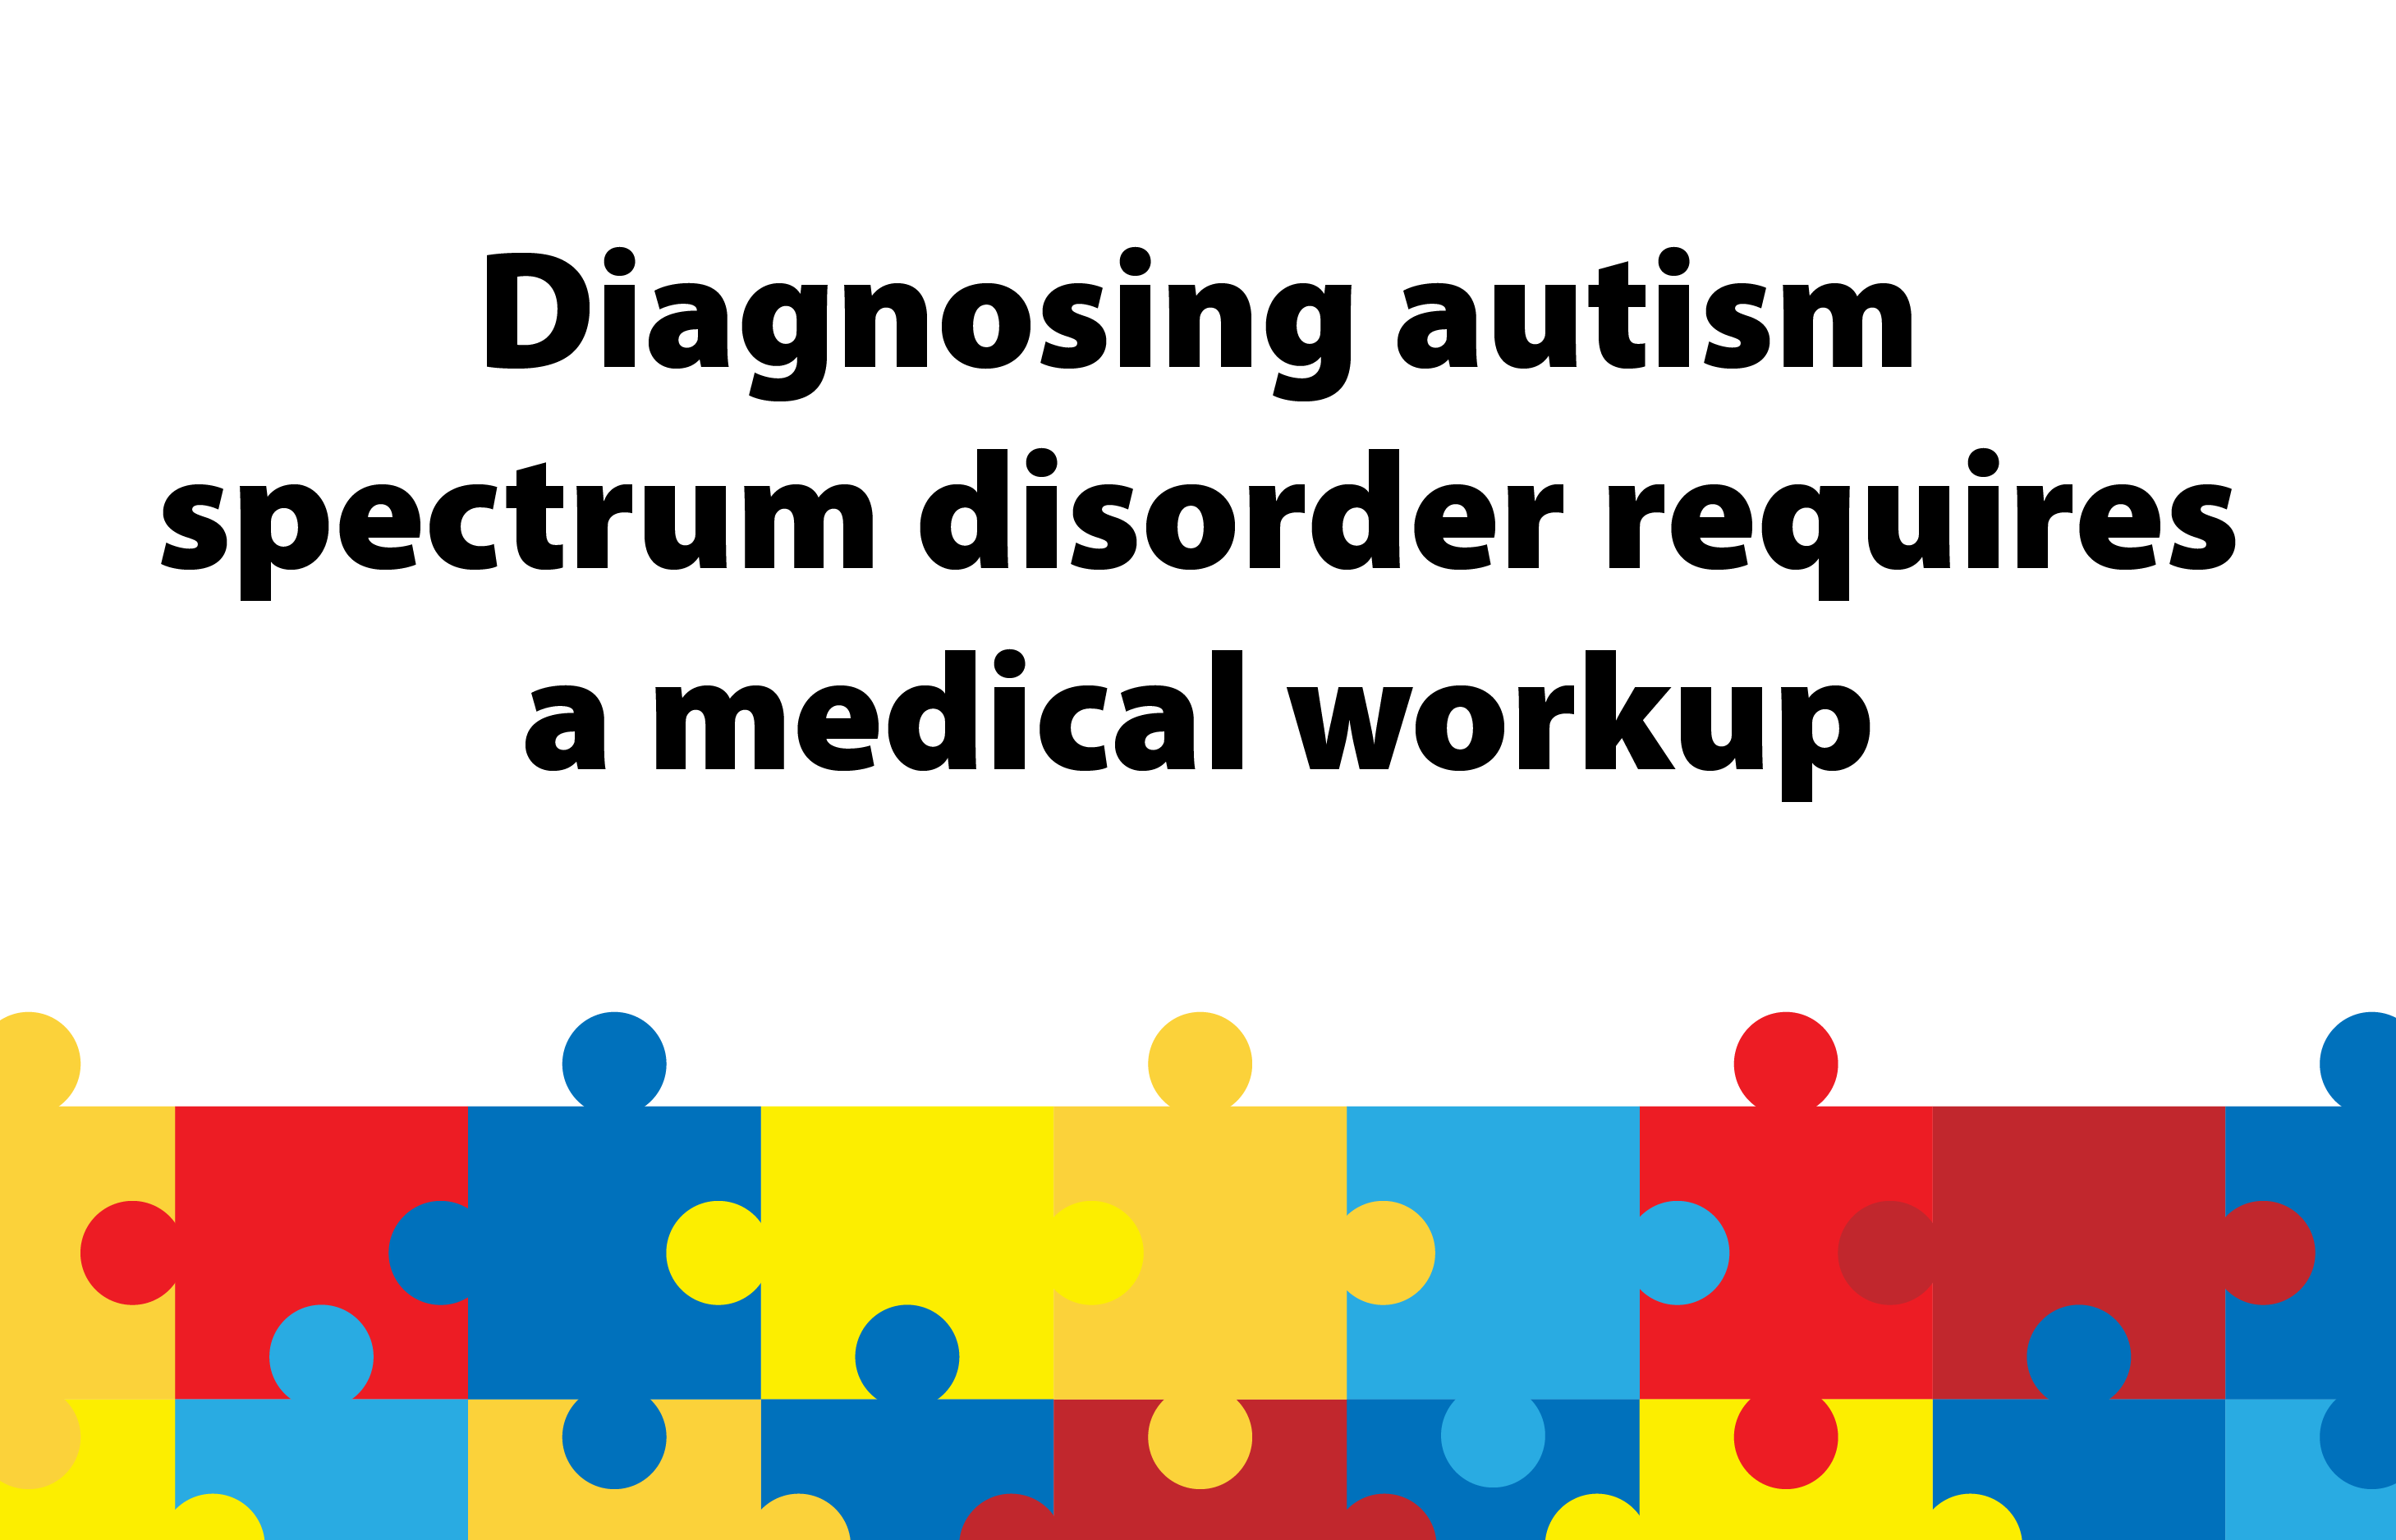 What to include in the workup for autism